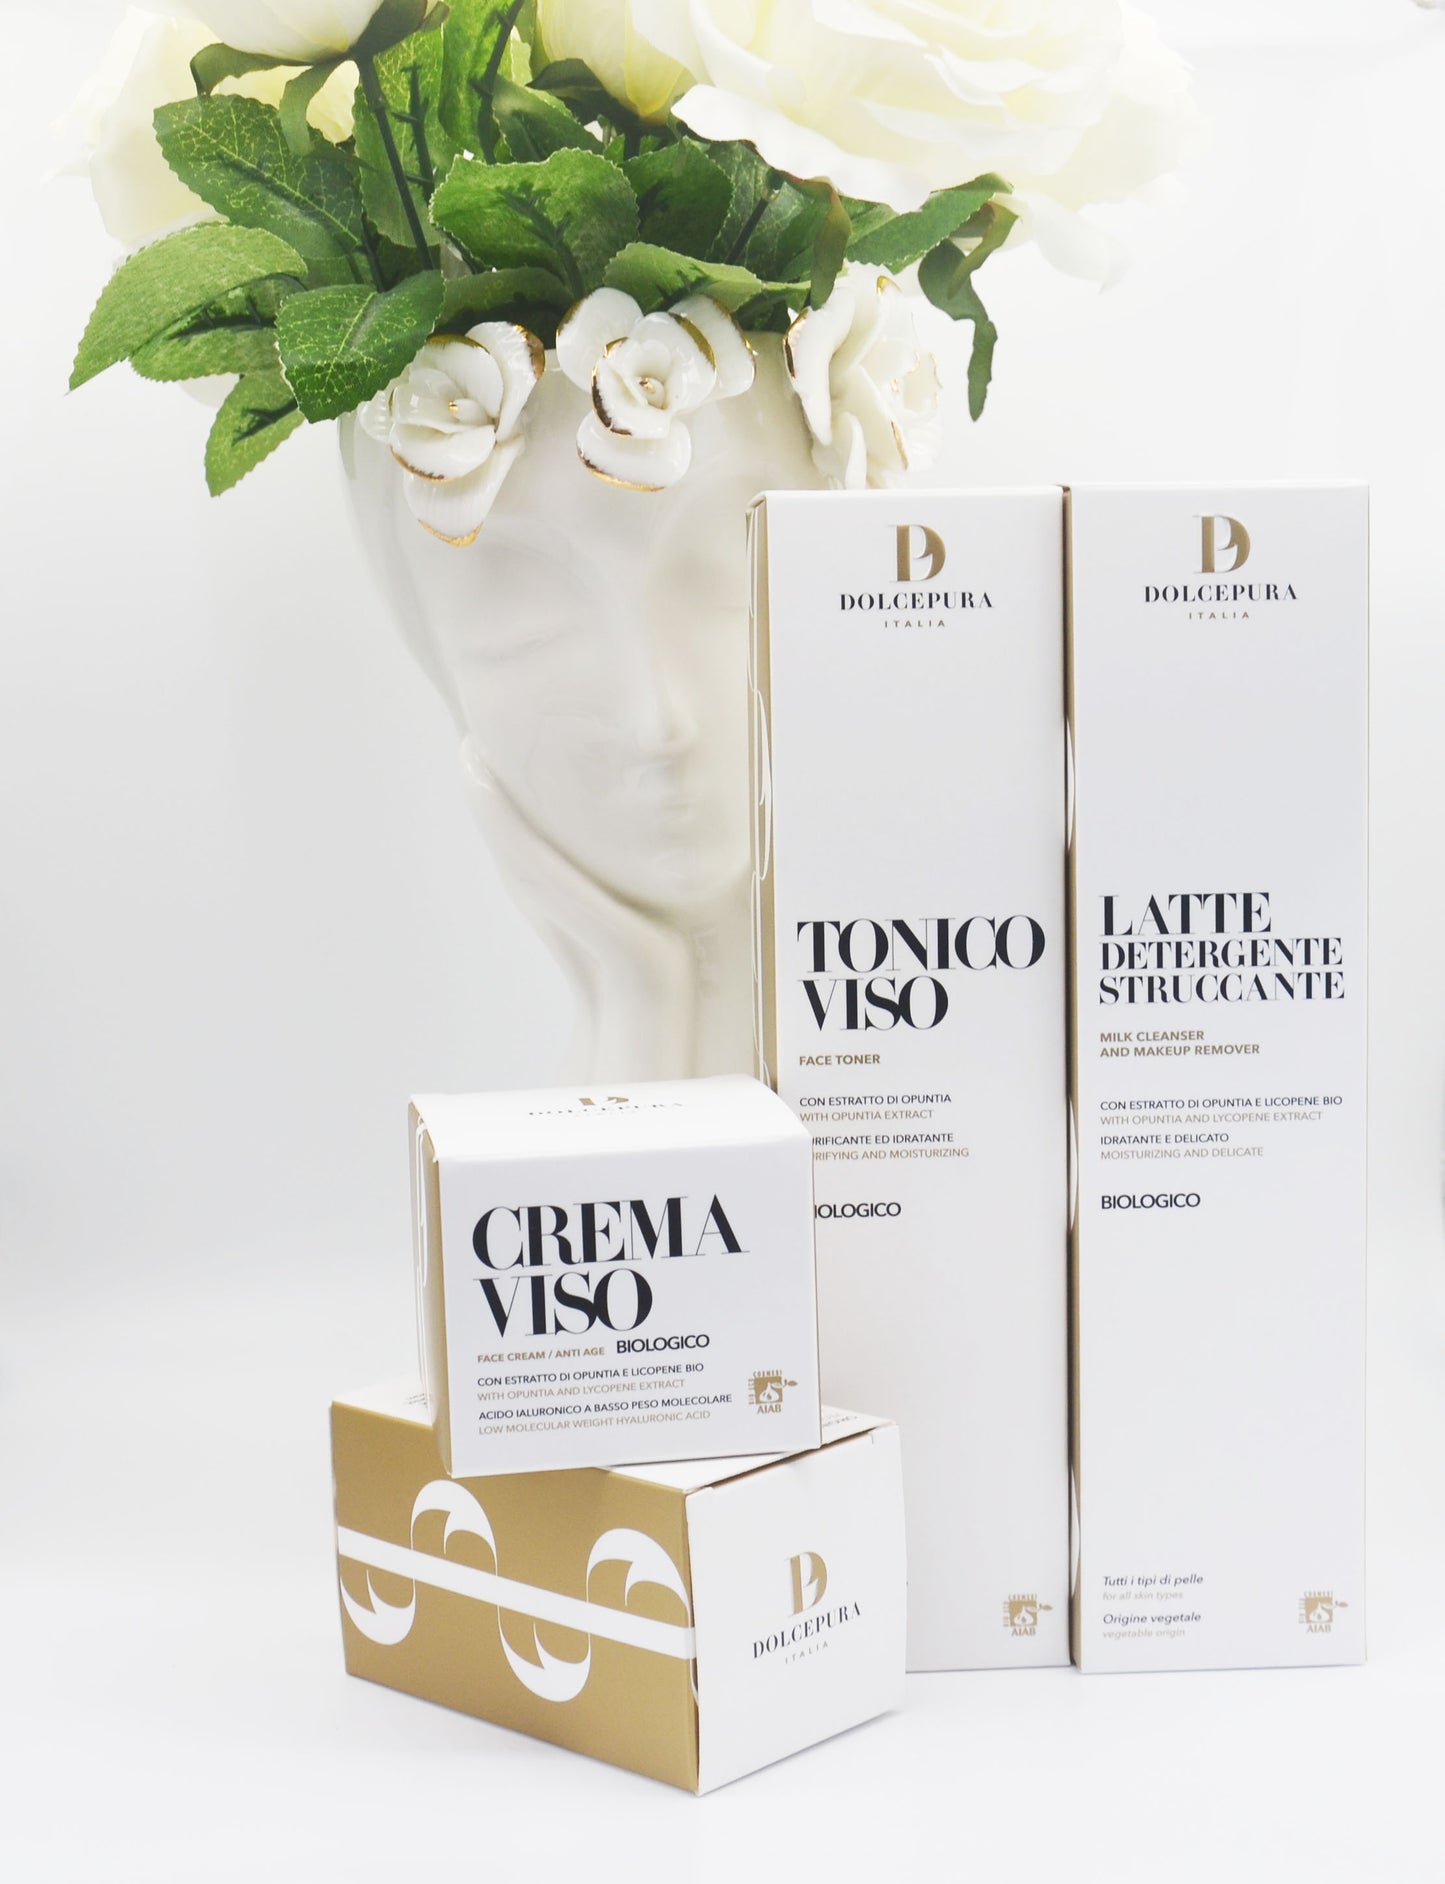 FACE set "UNICA" cleansing milk, tonic and cream (organic opuntia and lycopene) of small Italian production. Paraben-free - artificial fragrance - petroleum - silicone - dyes